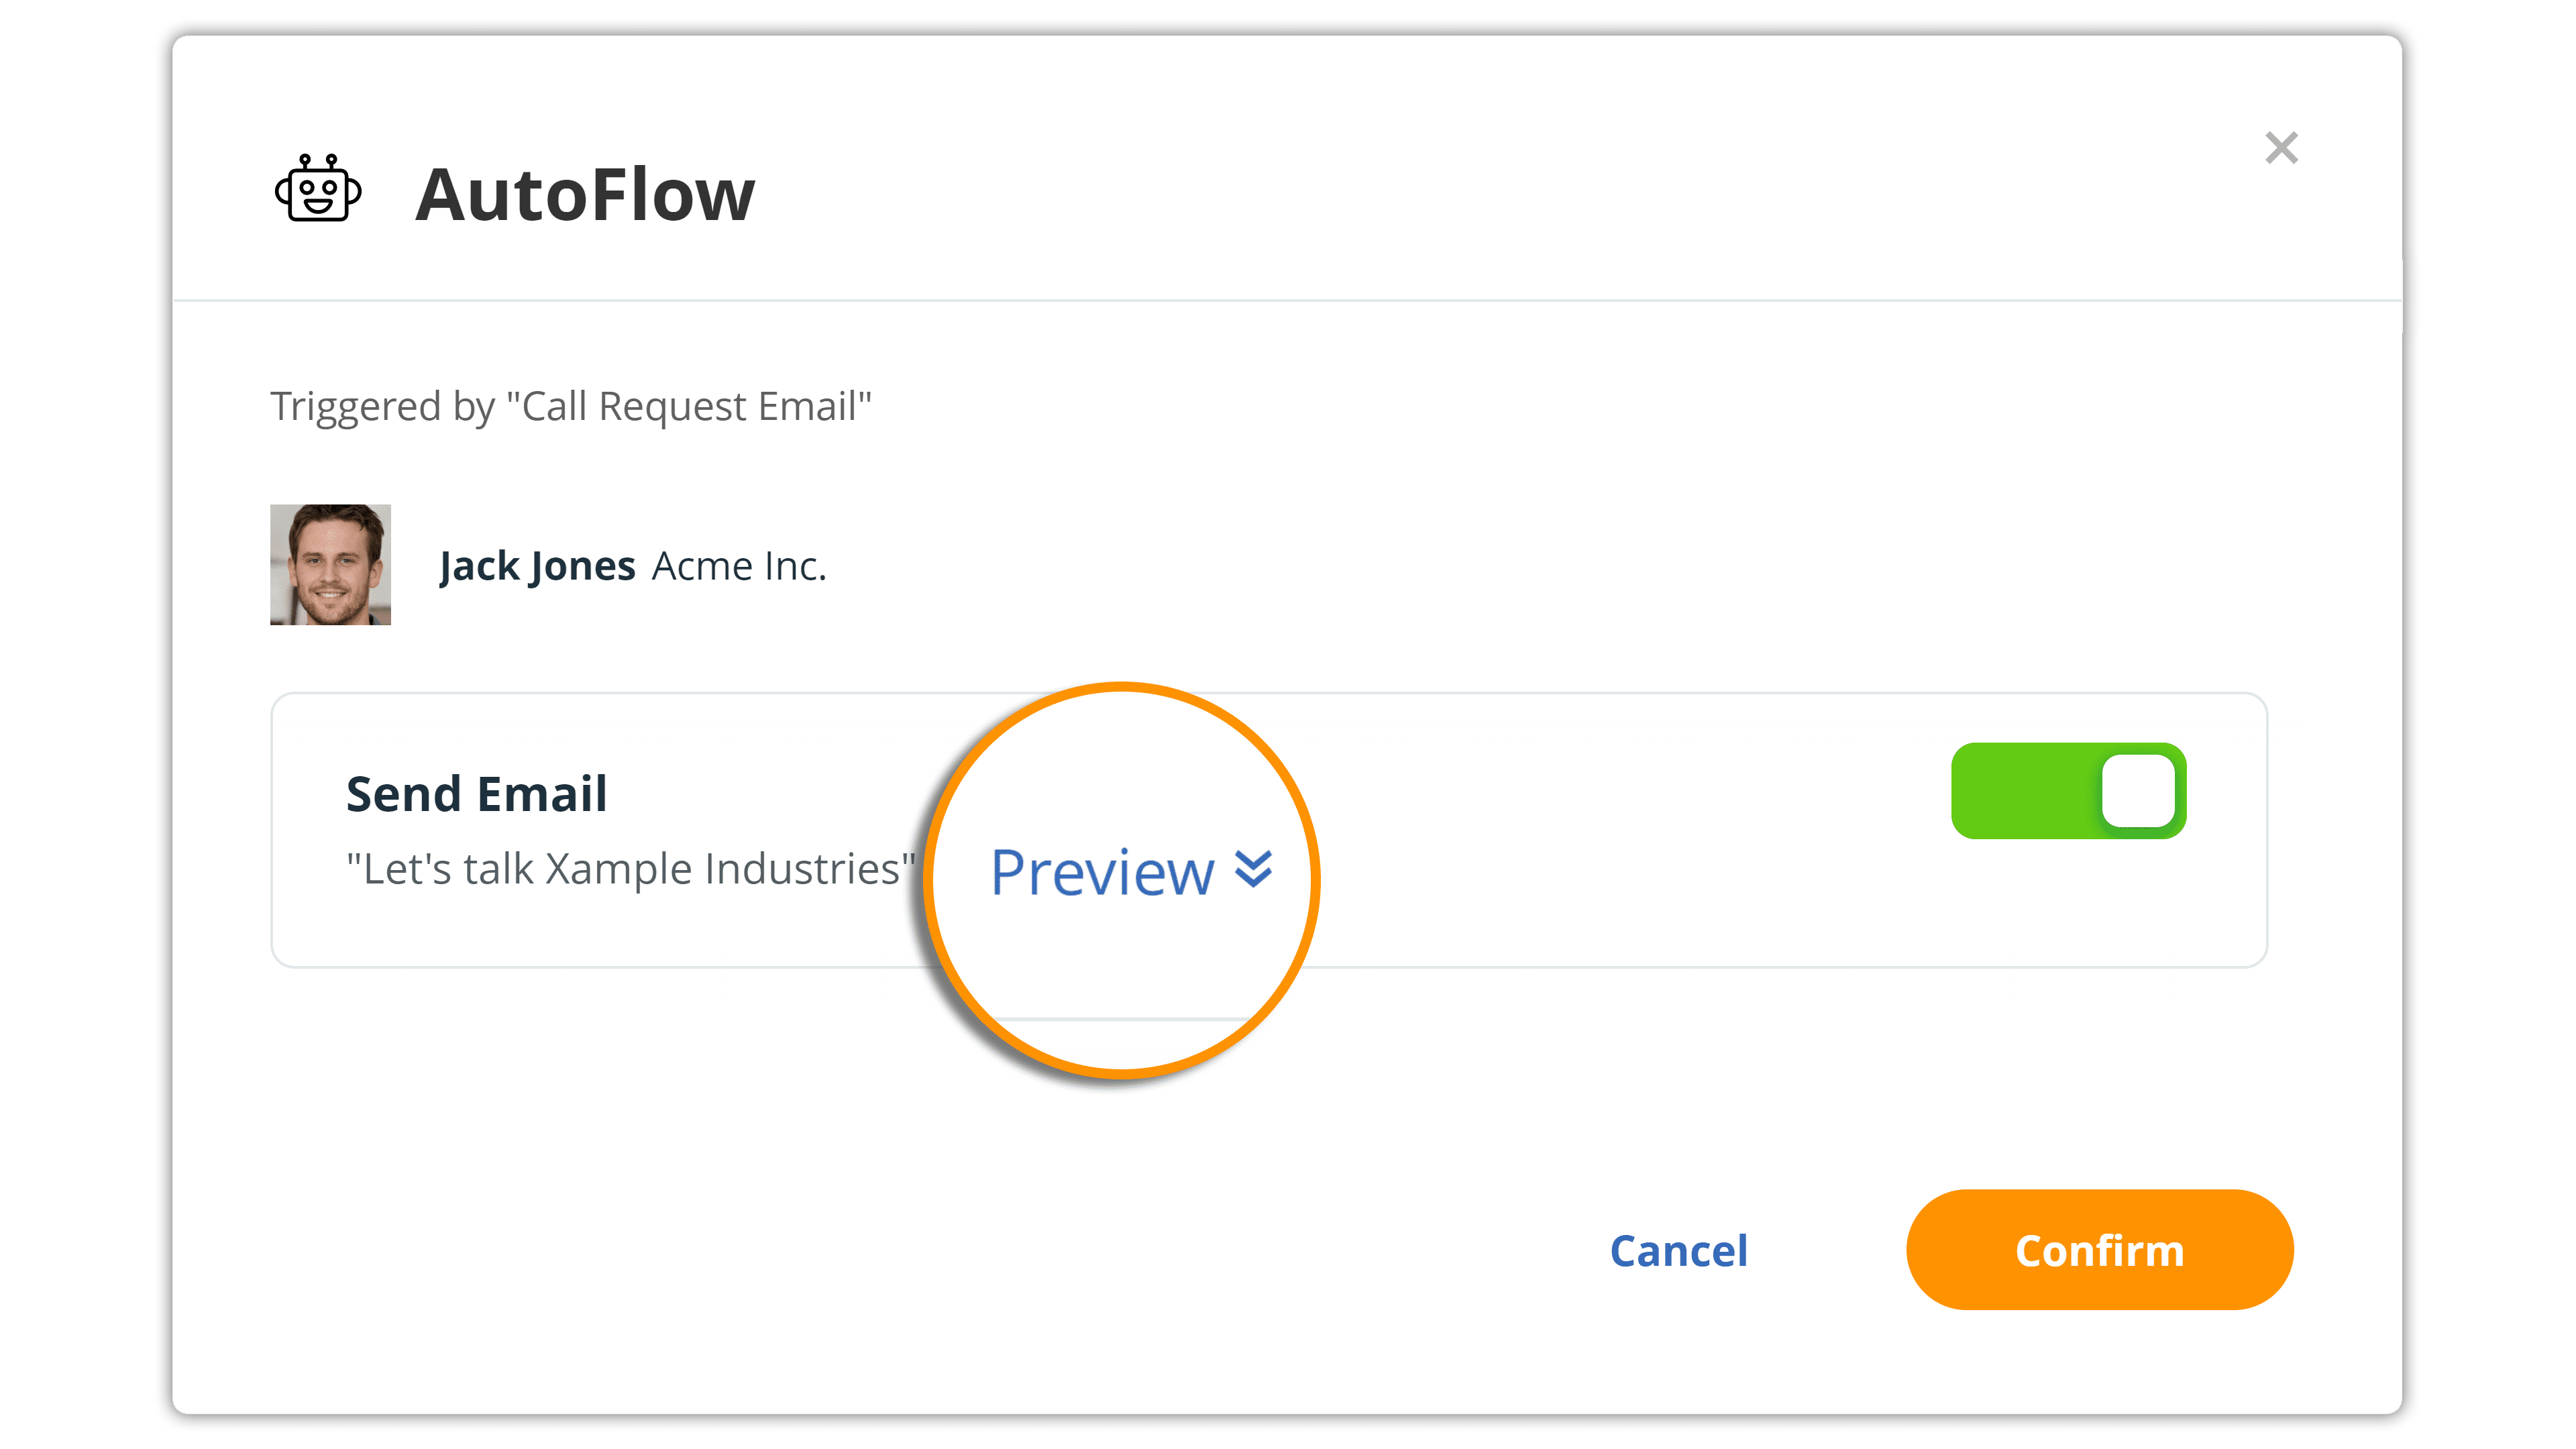 Autoflow allows users to automate repetitive sales tasks, like sending an email